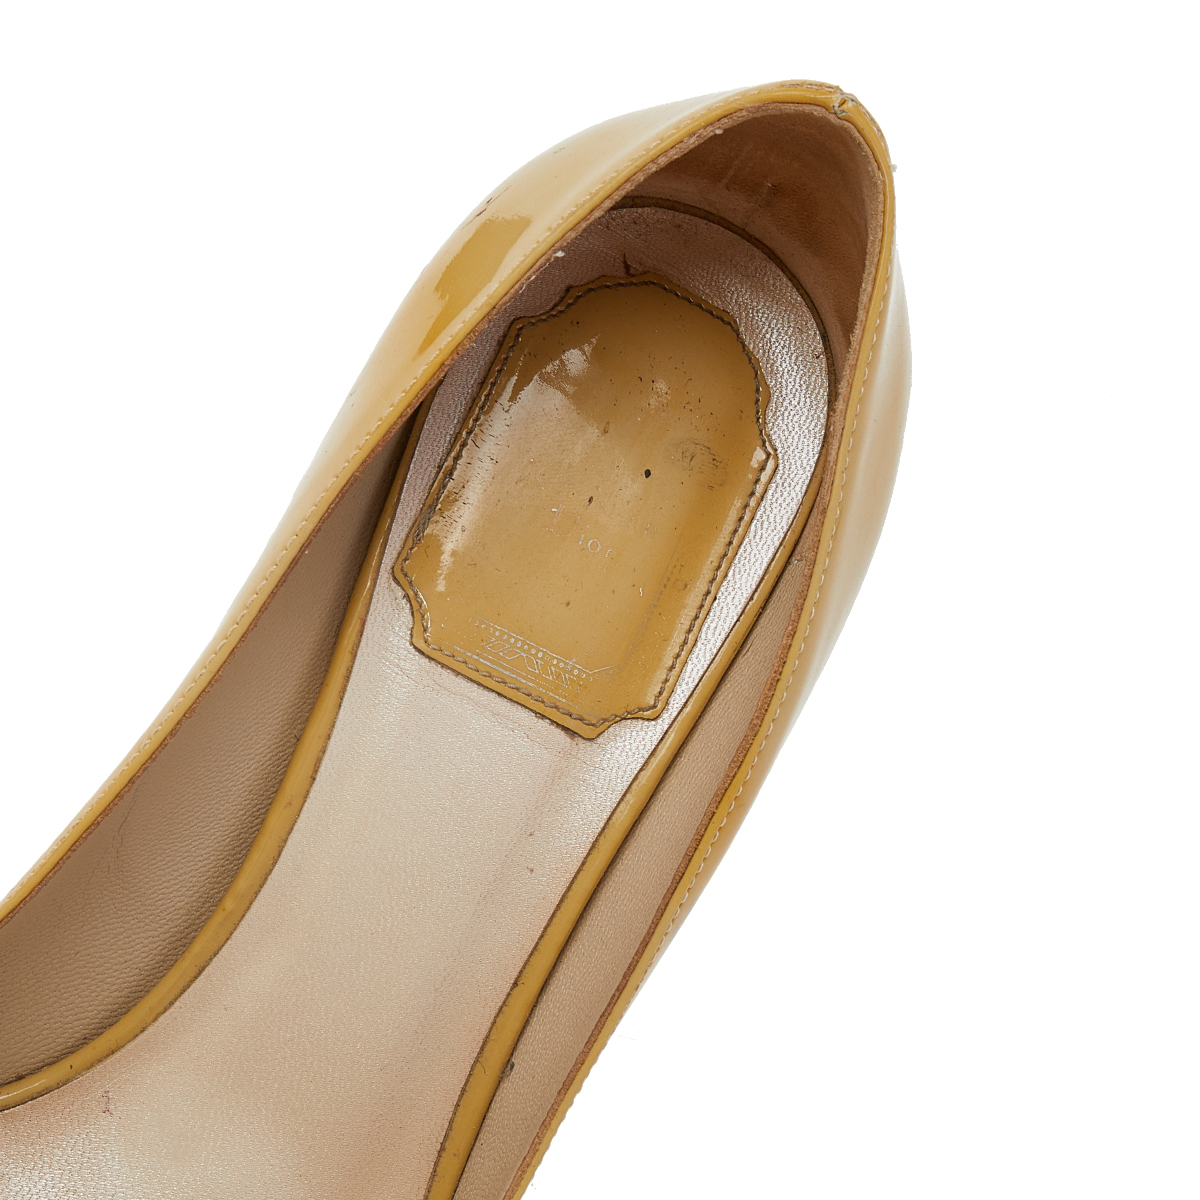 Dior Yellow Patent Leather Round Toe Pumps Size 37